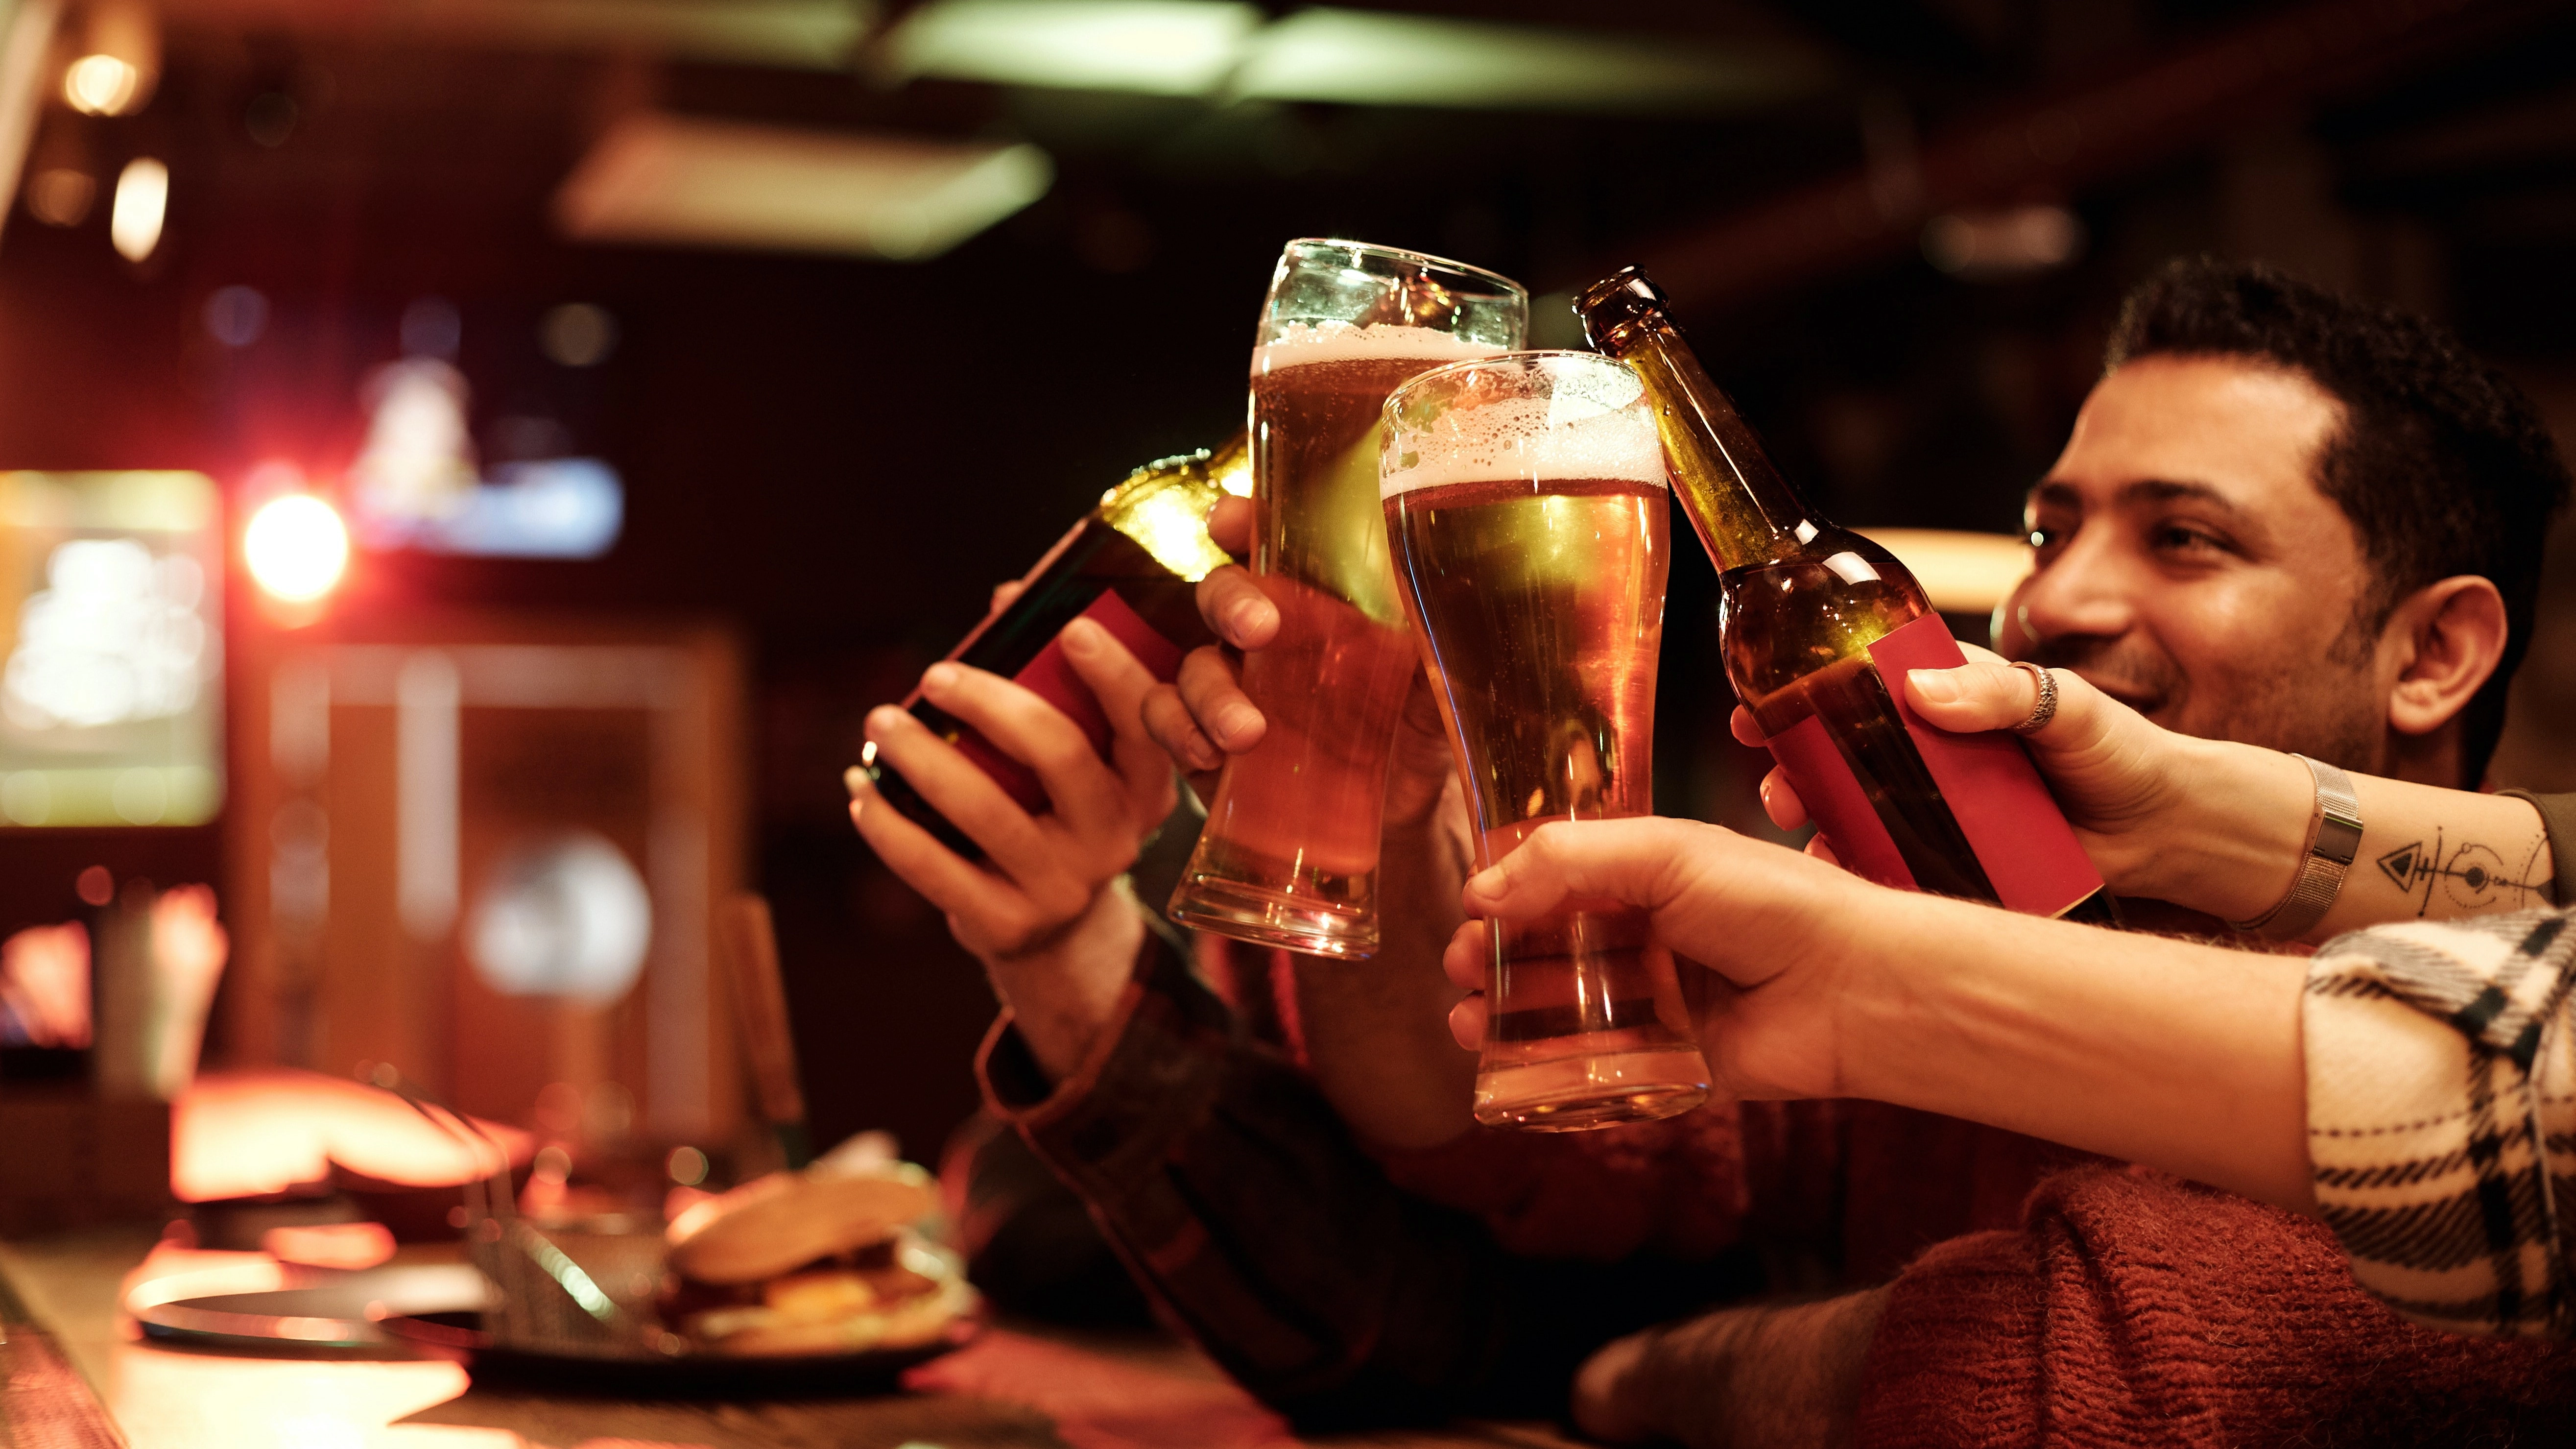 The link between alcohol consumption and cancer